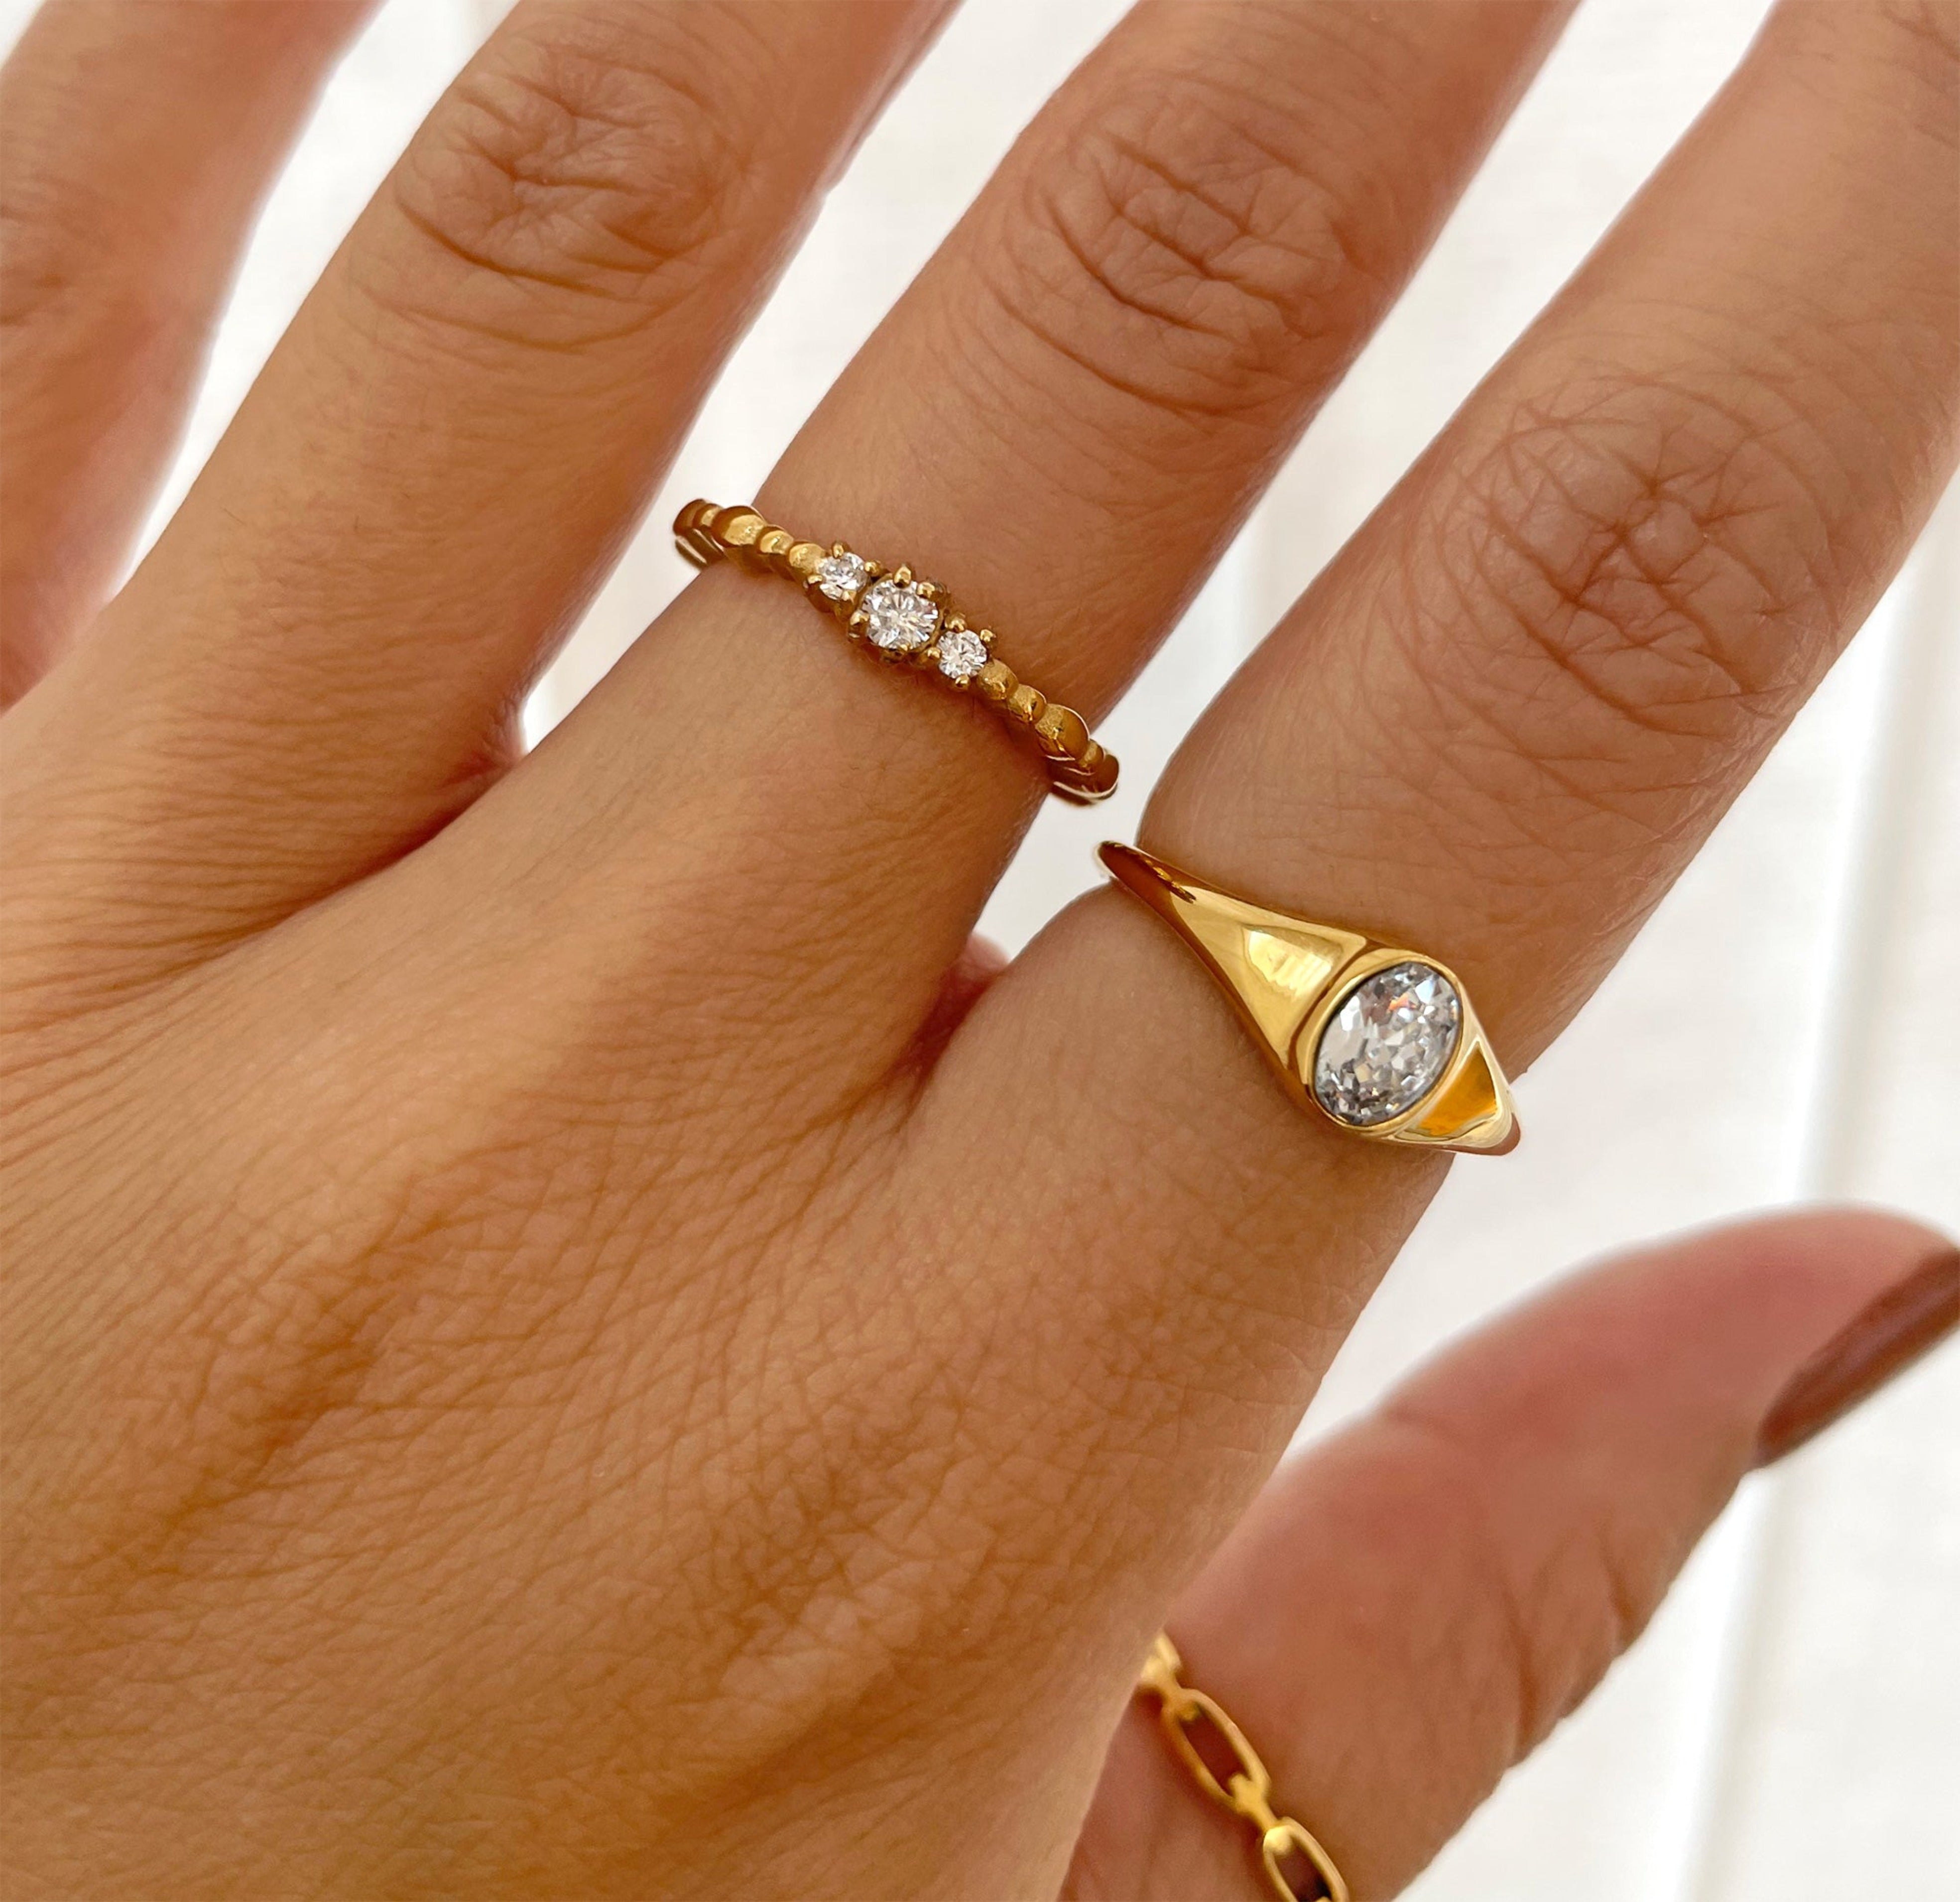 Celeste gold dainty trim stone ring paired with Jeanie oval white stone ring, Waterproof jewelry